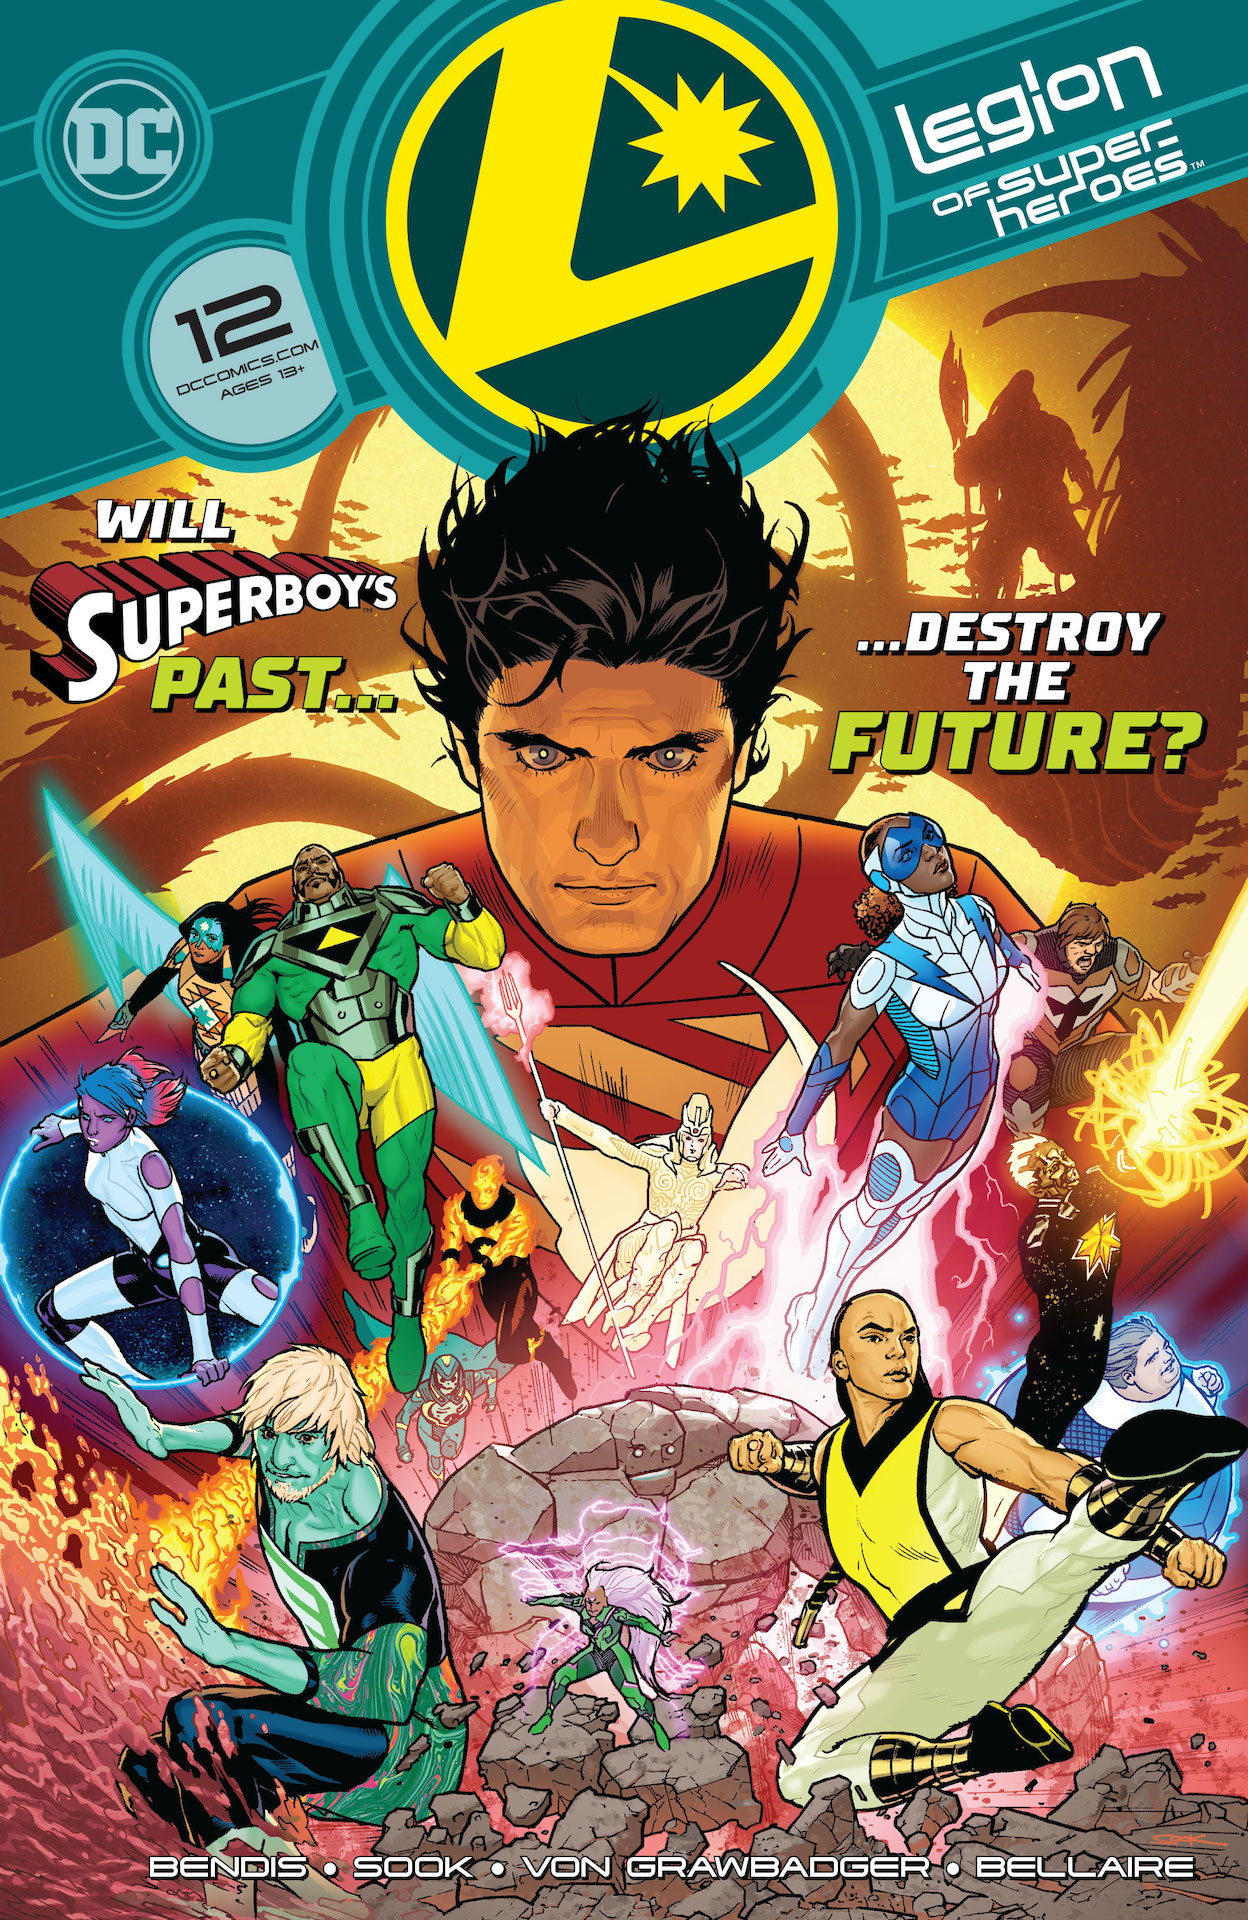 DC Preview: Legion of Super-Heroes #12